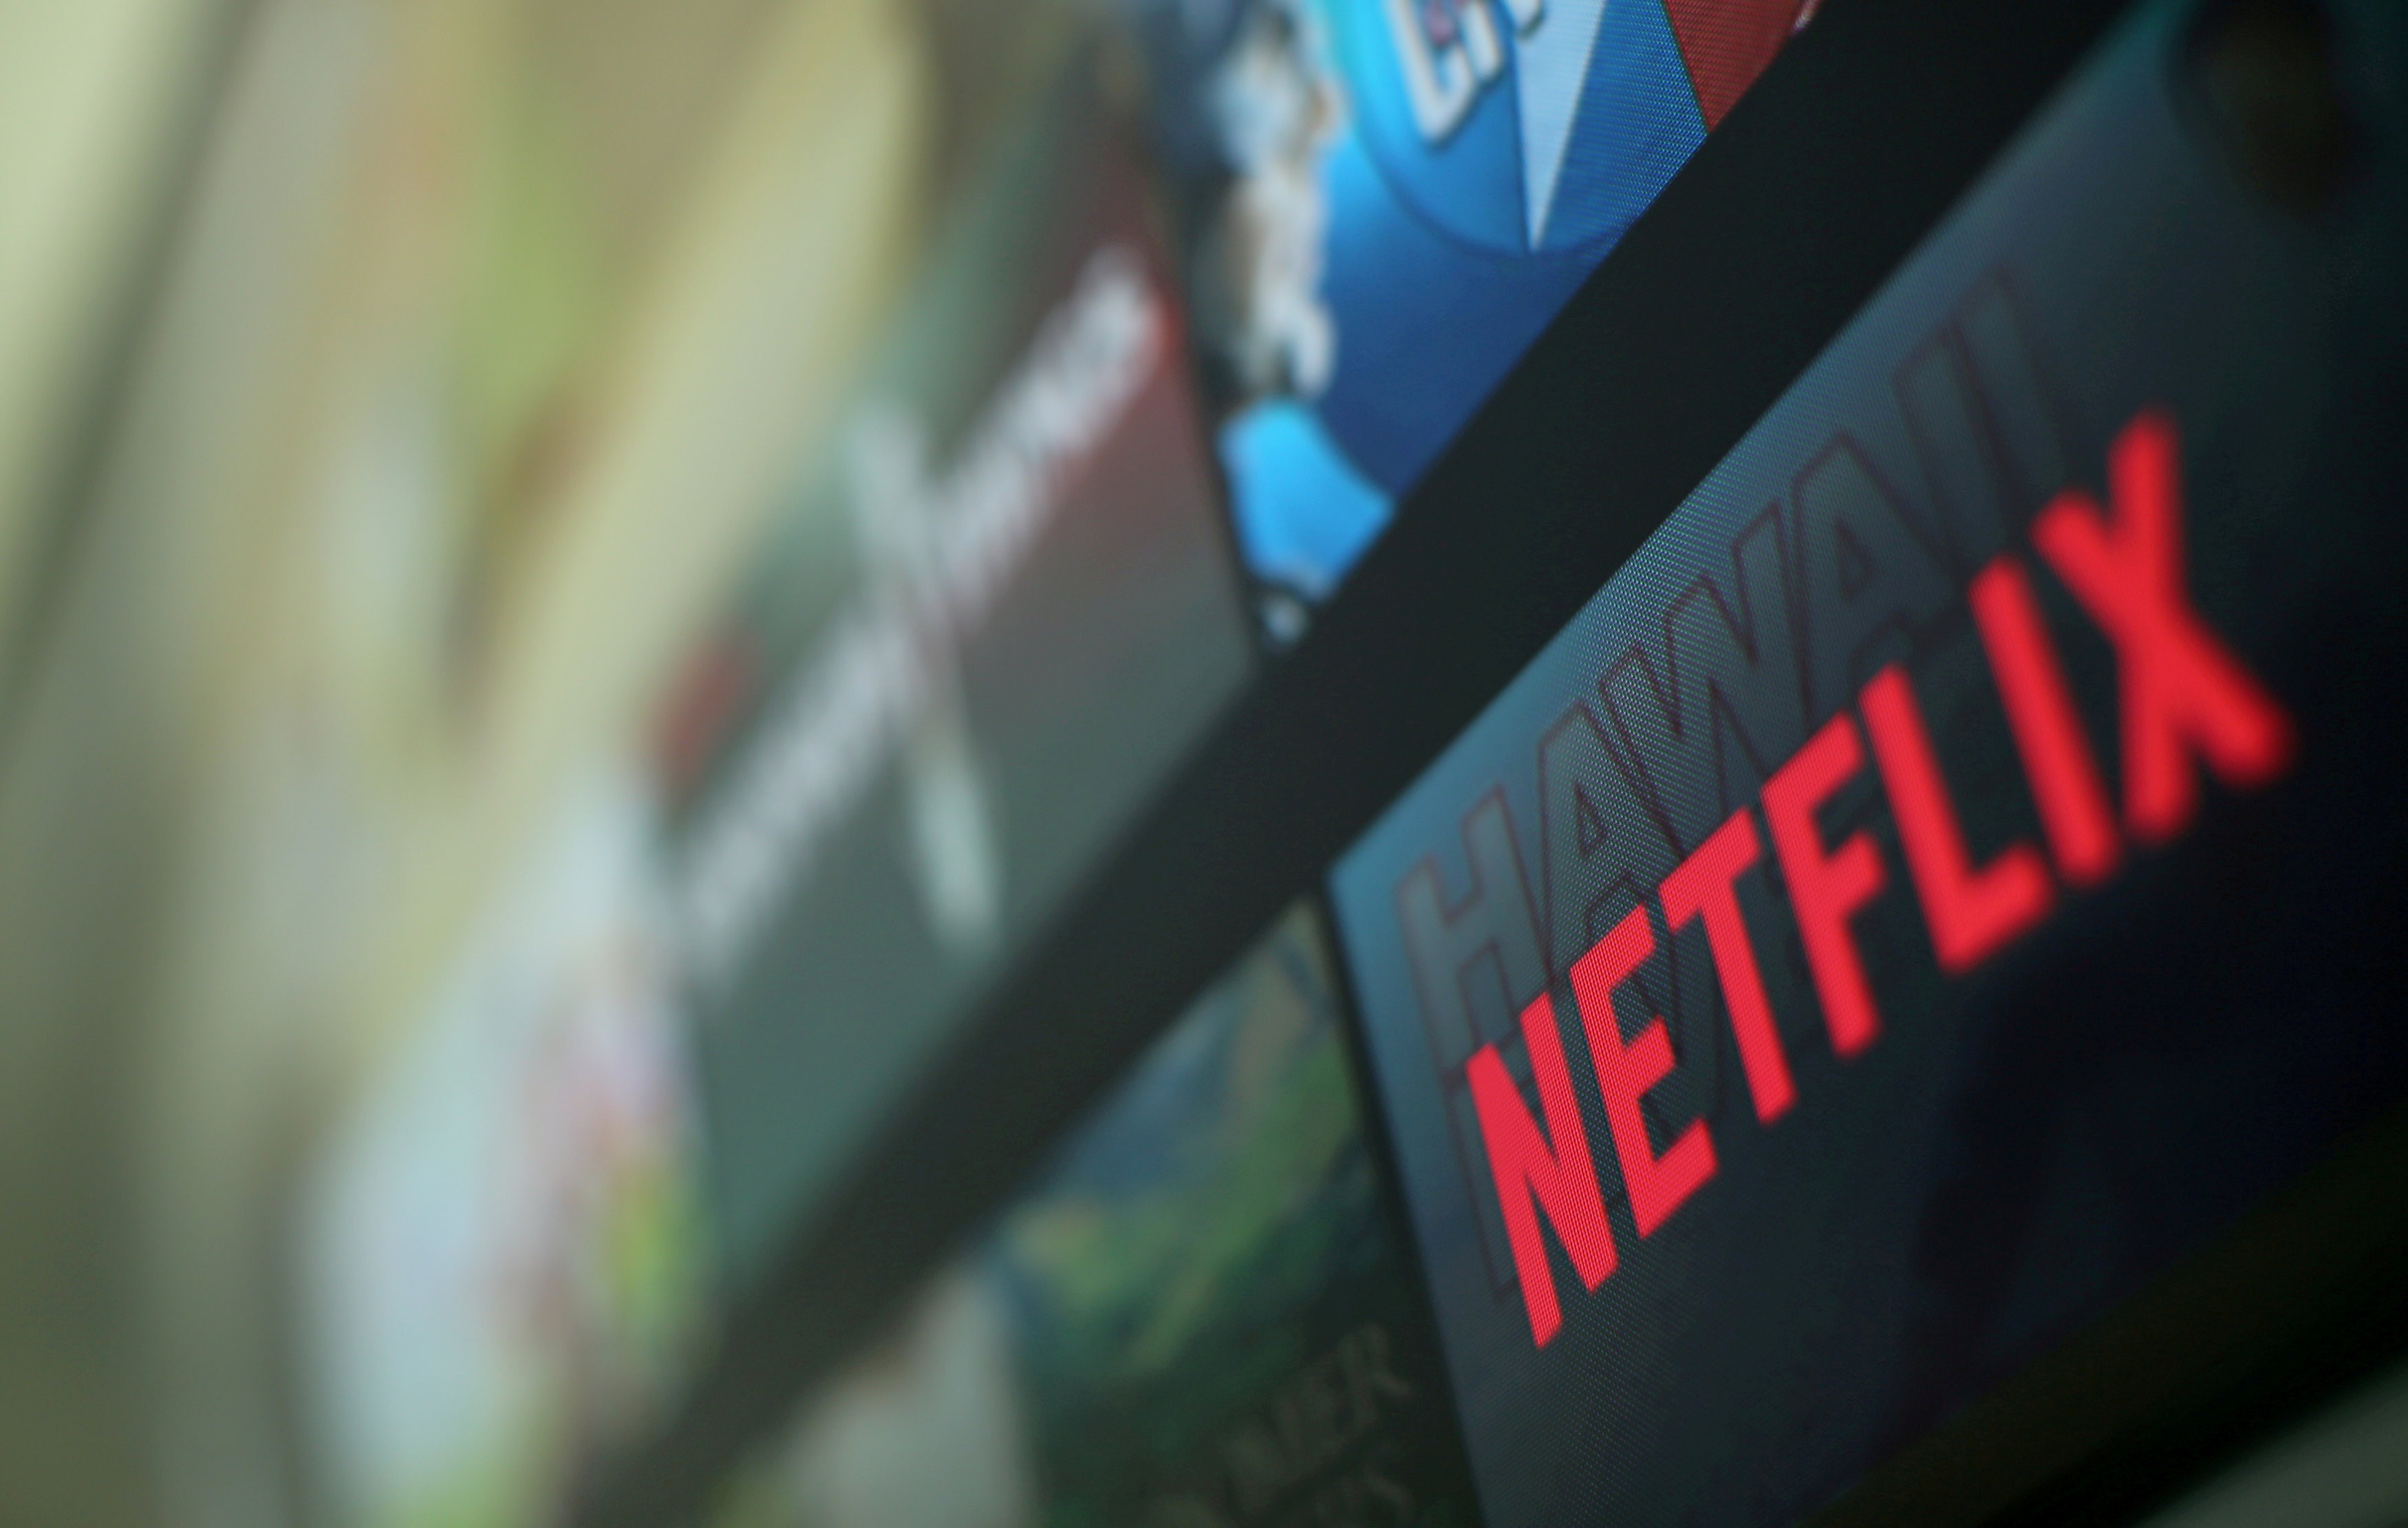 Fifty-five per cent of American households subscribe to at least one video streaming service, a new Deloitte survey finds